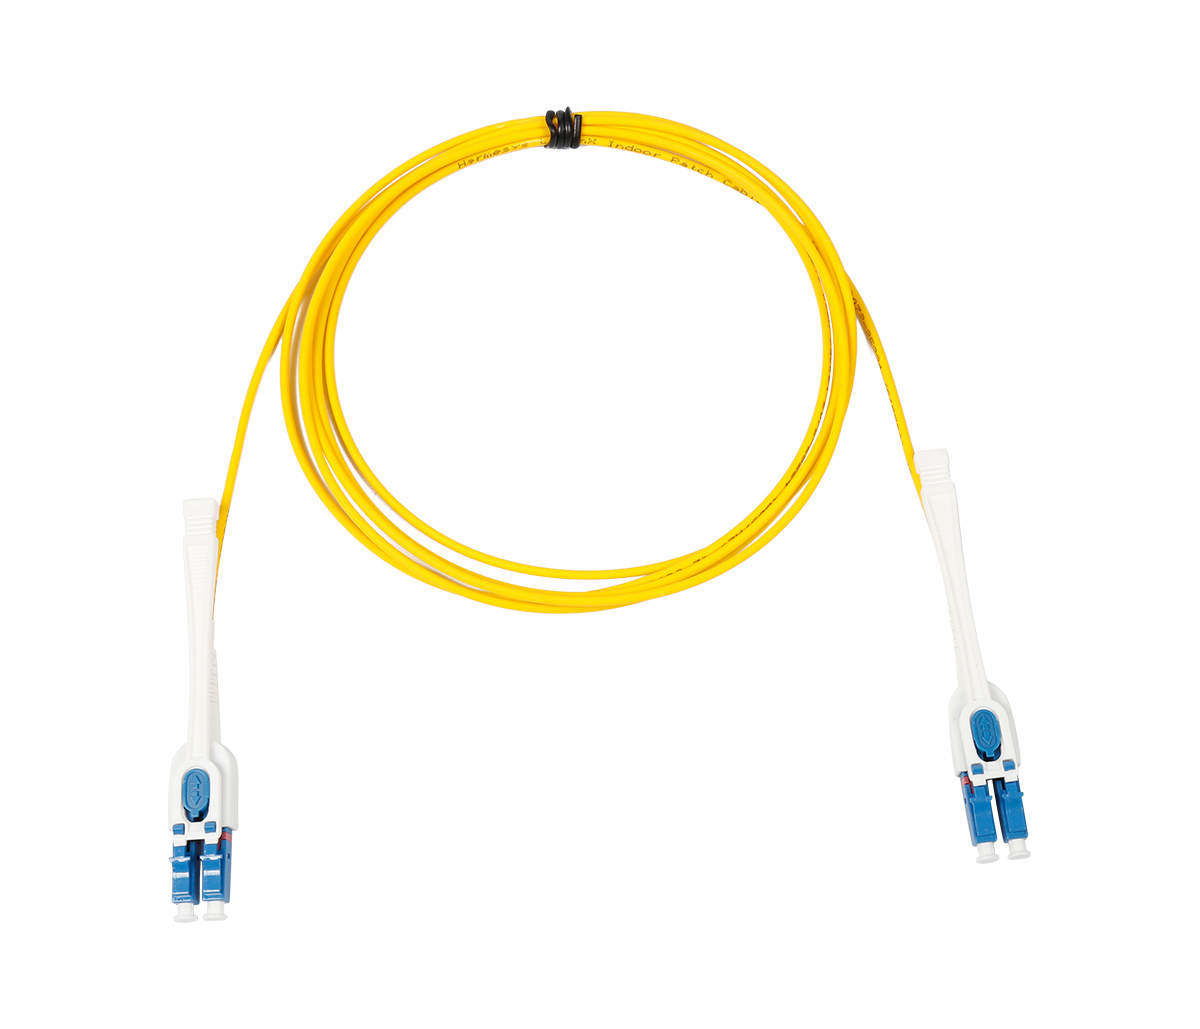 LC Optic Patch-Cord